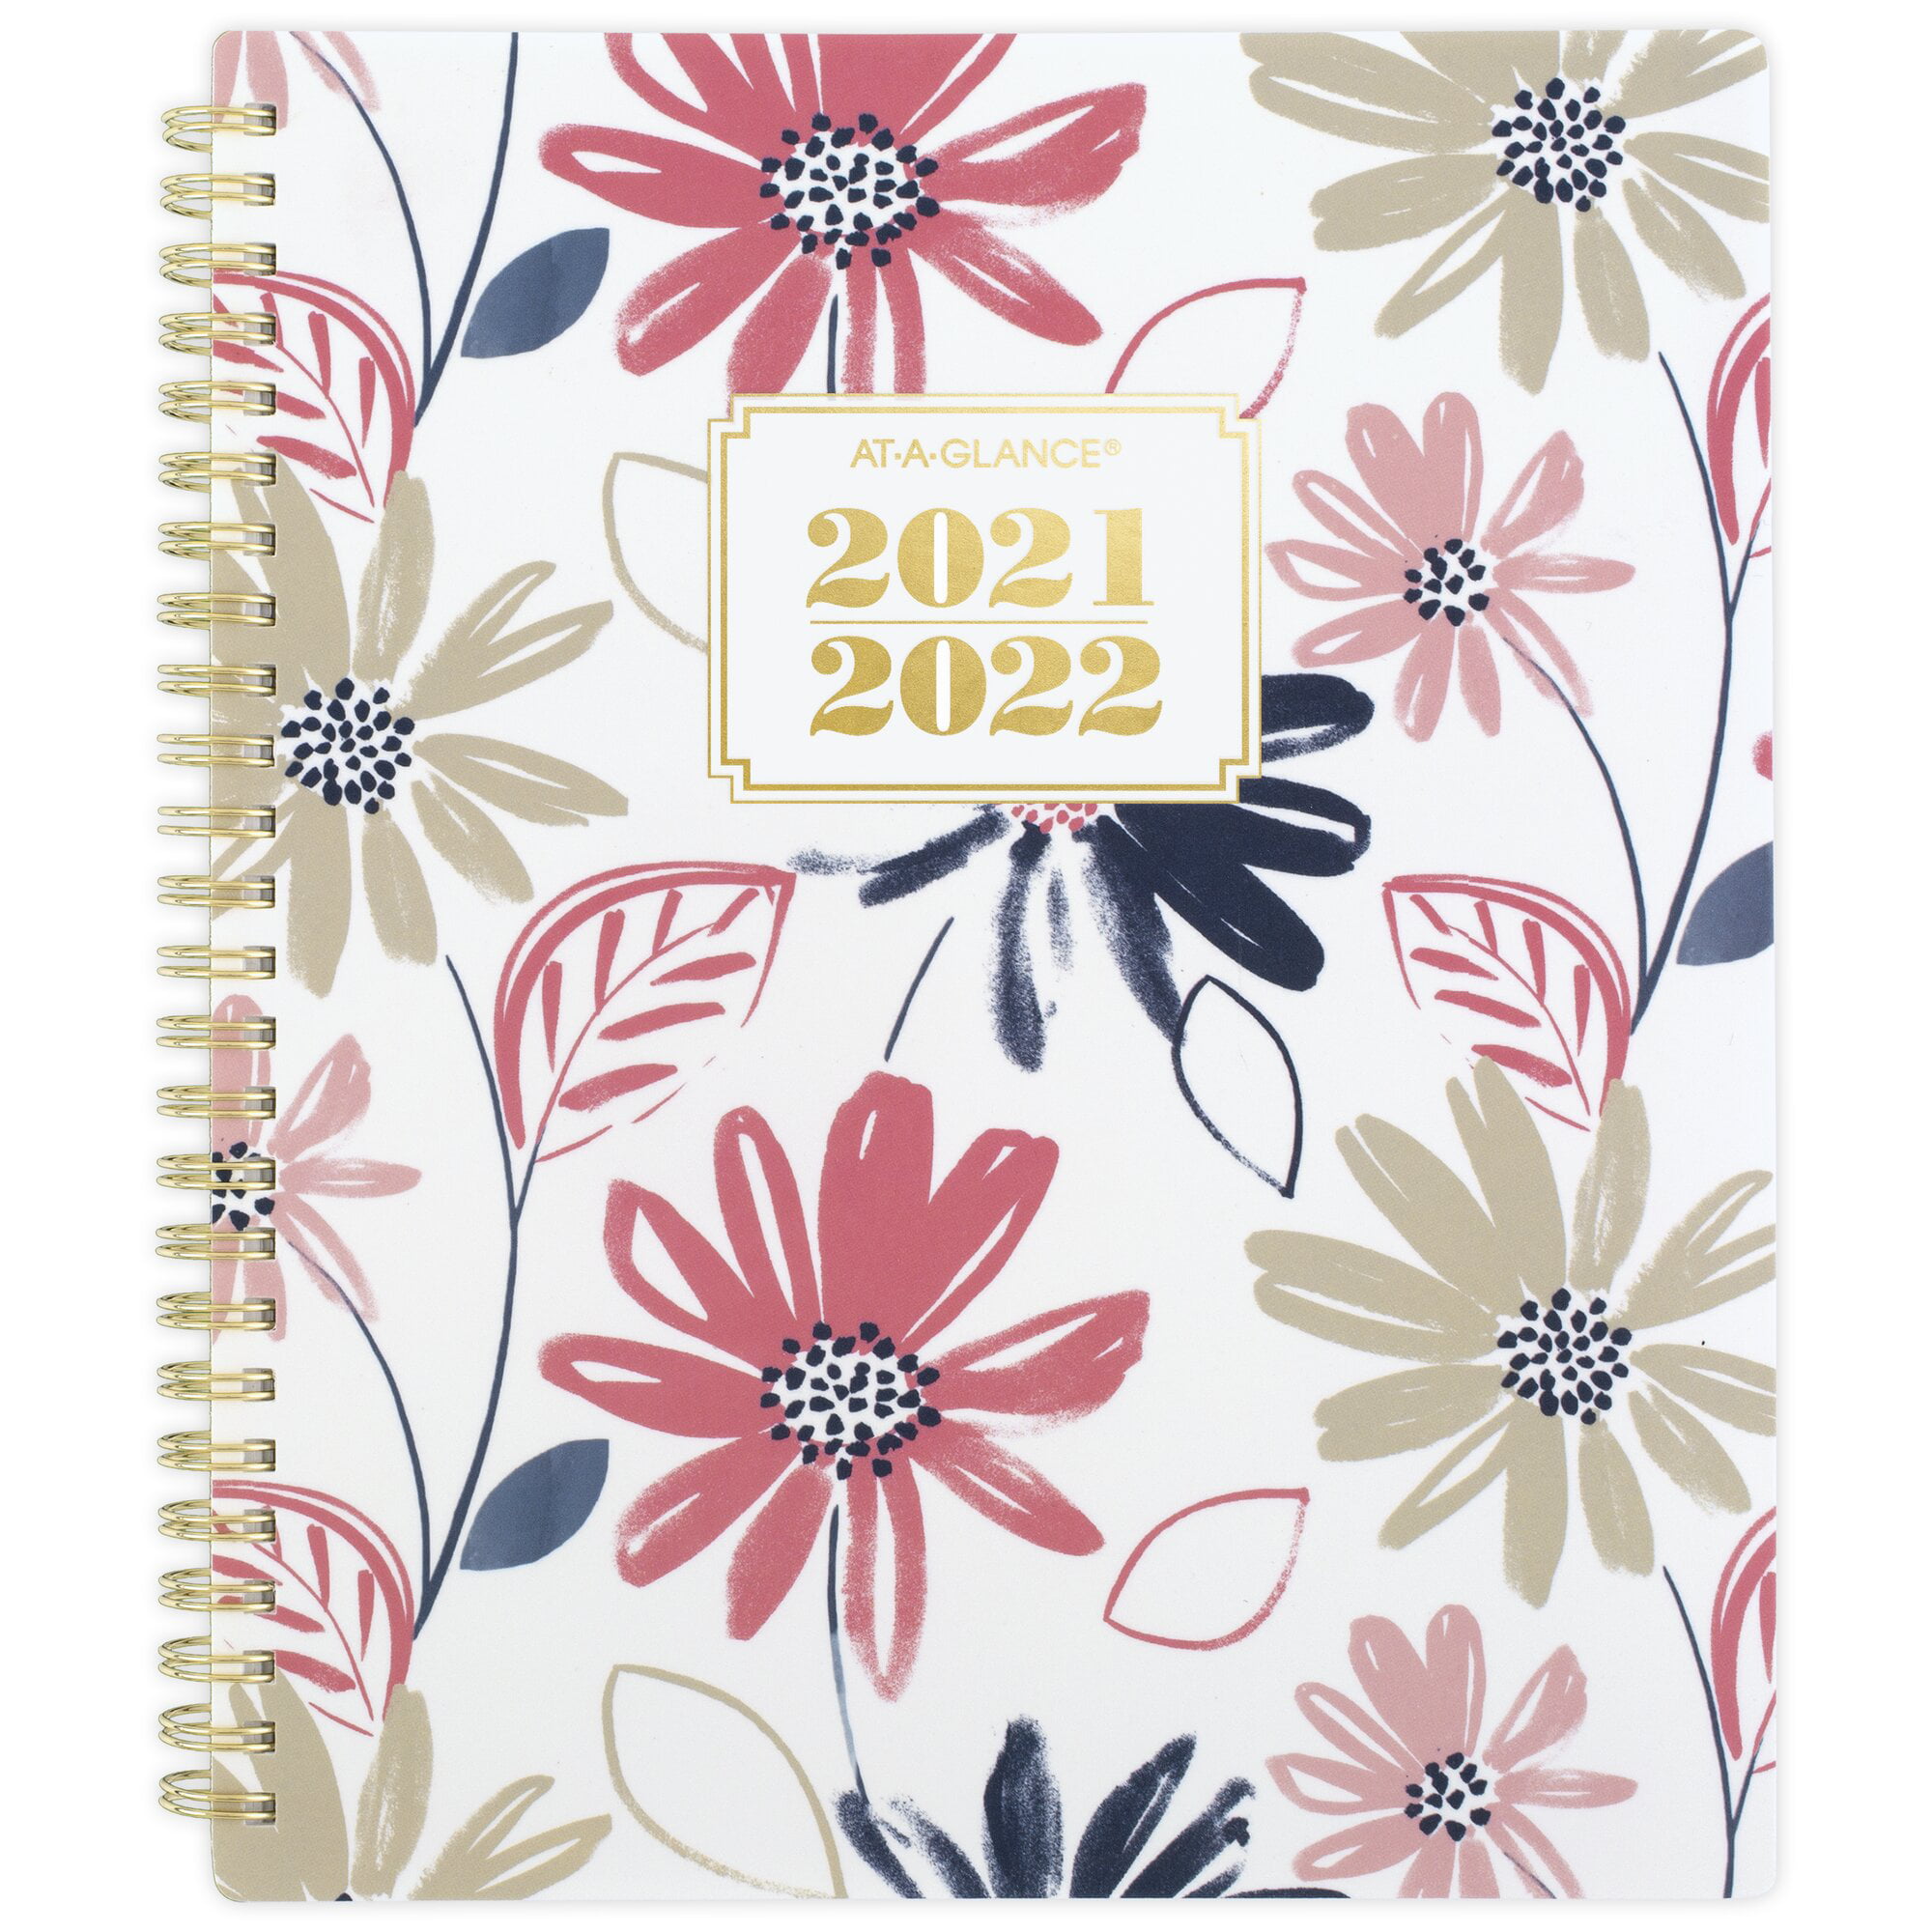 Dec 2022 2021-2022 Monthly Planner Monthly Large Pink Jul 2021 